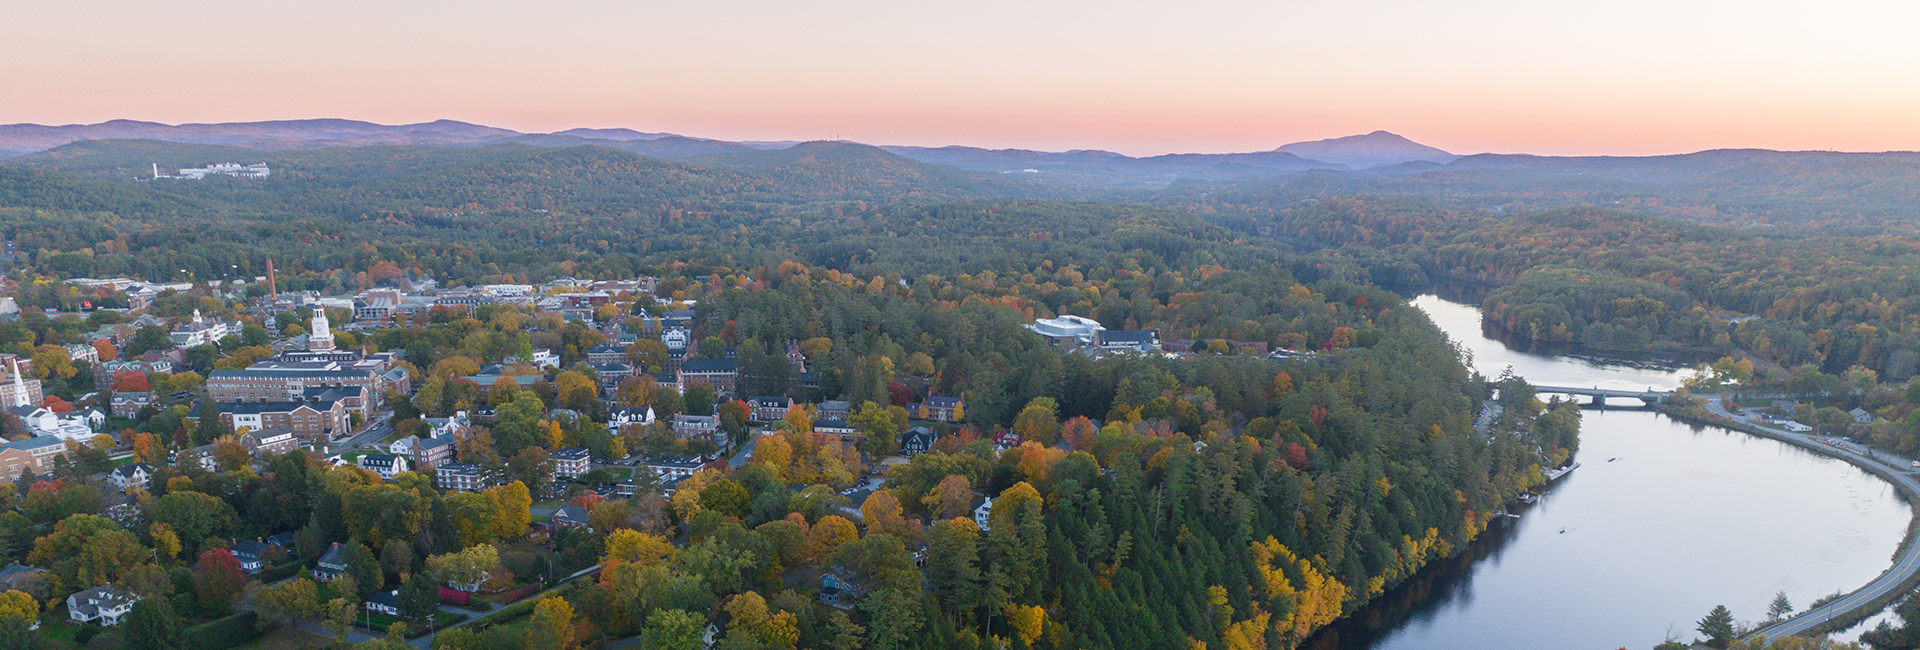 Drone shot of Dartmouth campus in the fall overlooking the Connecticut River